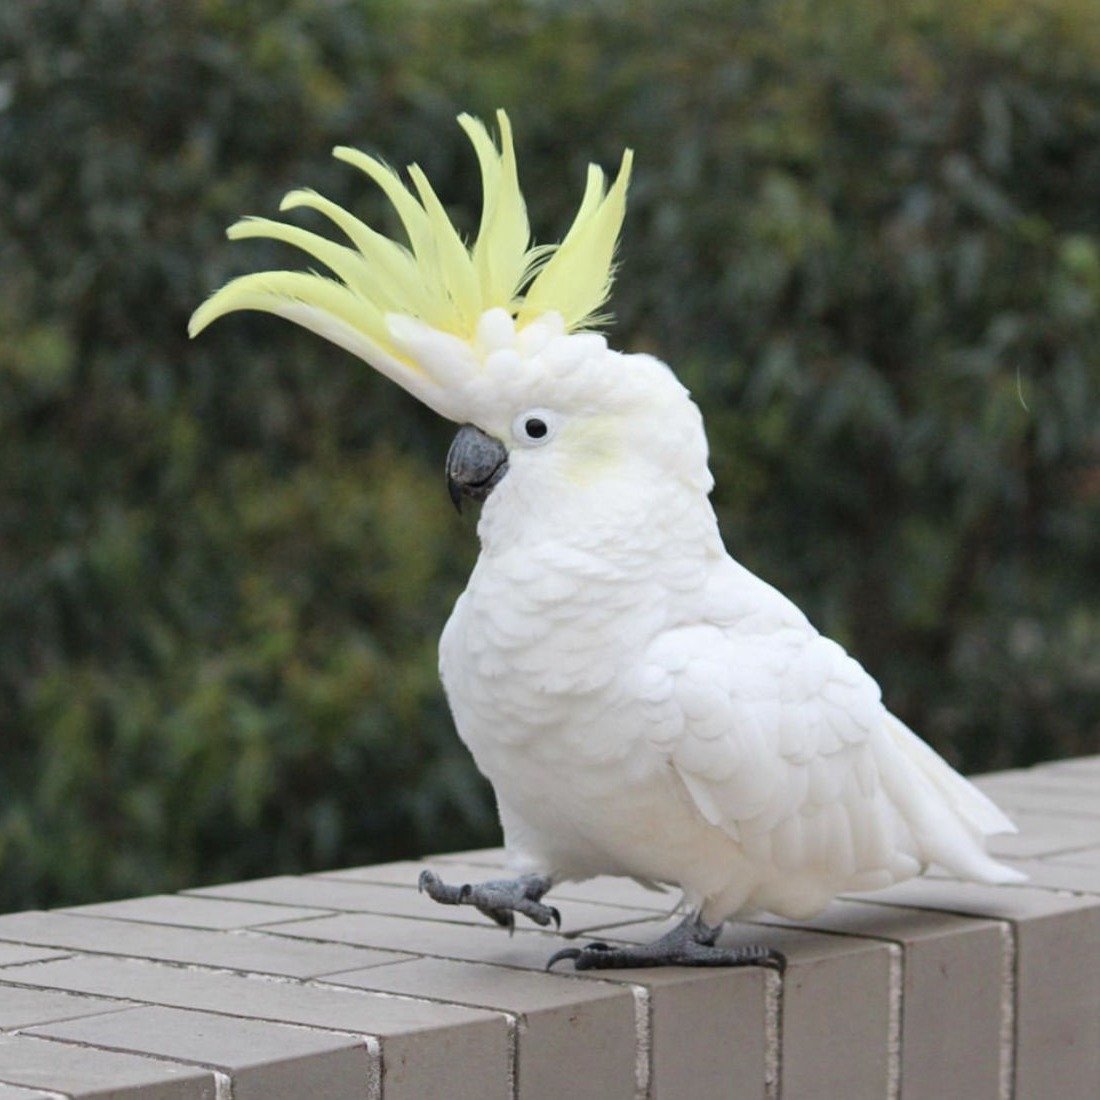 Sulphur-crested Cockatoo for sale